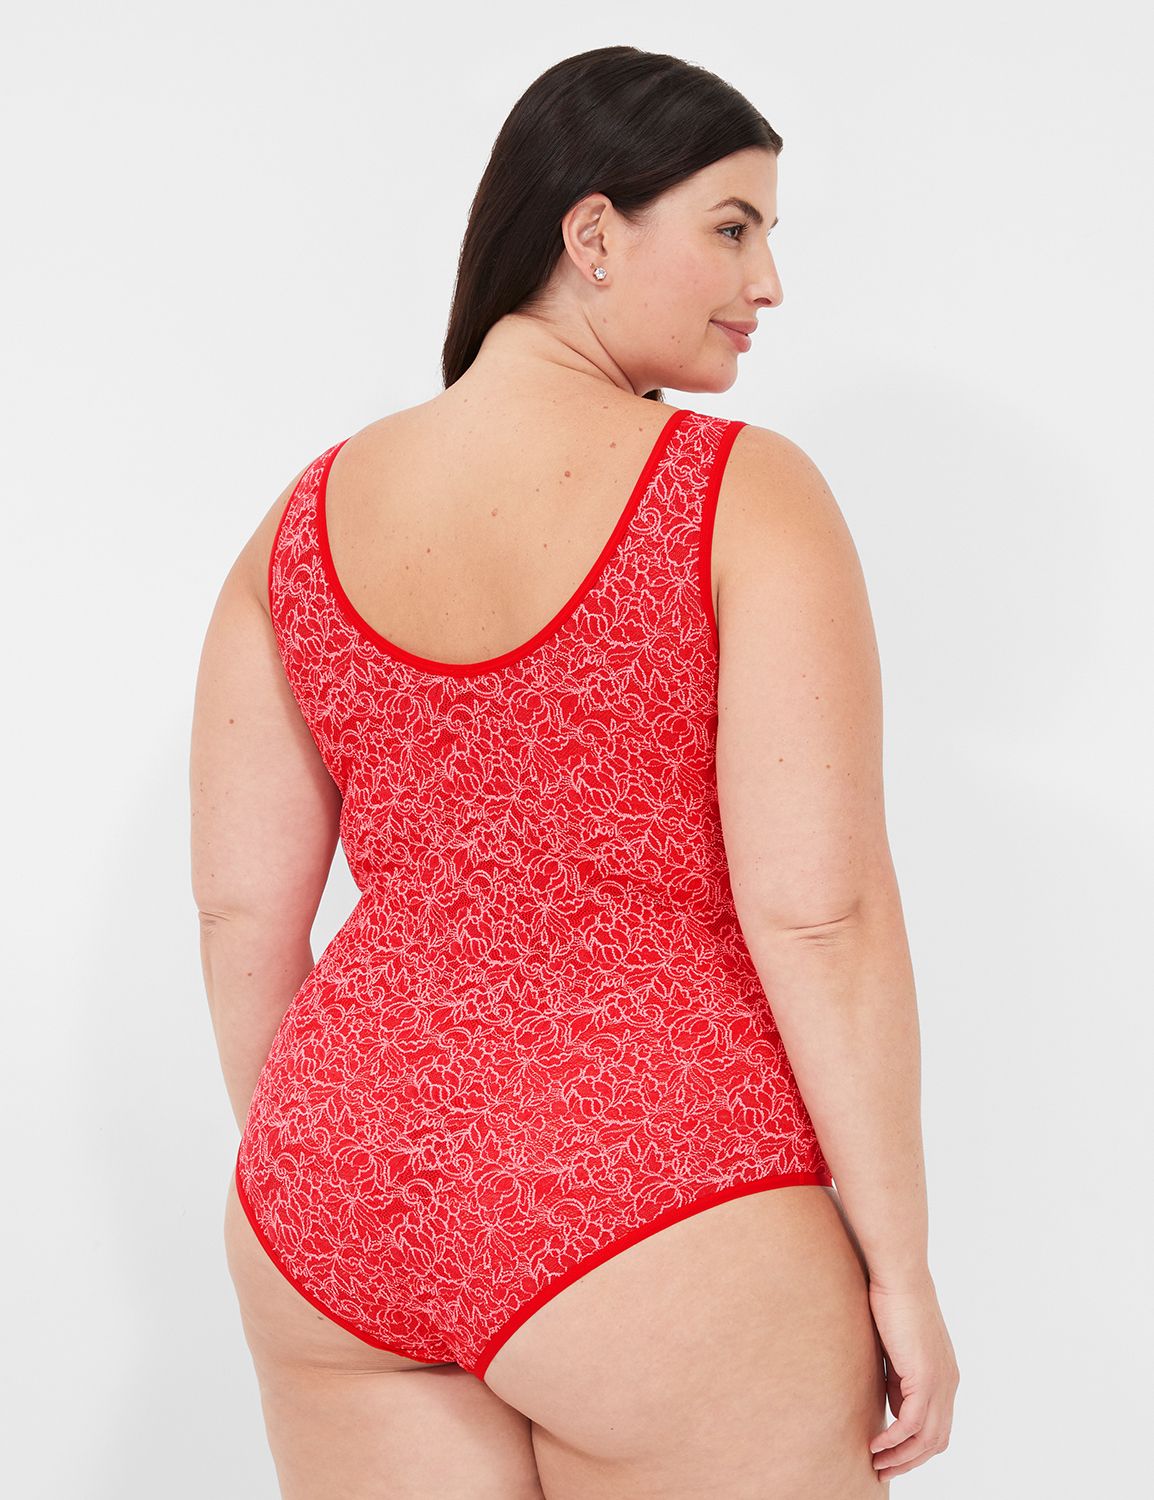 RKSTN Womens Lingeries New Mesh Sexy Red Lingerie Plus Size